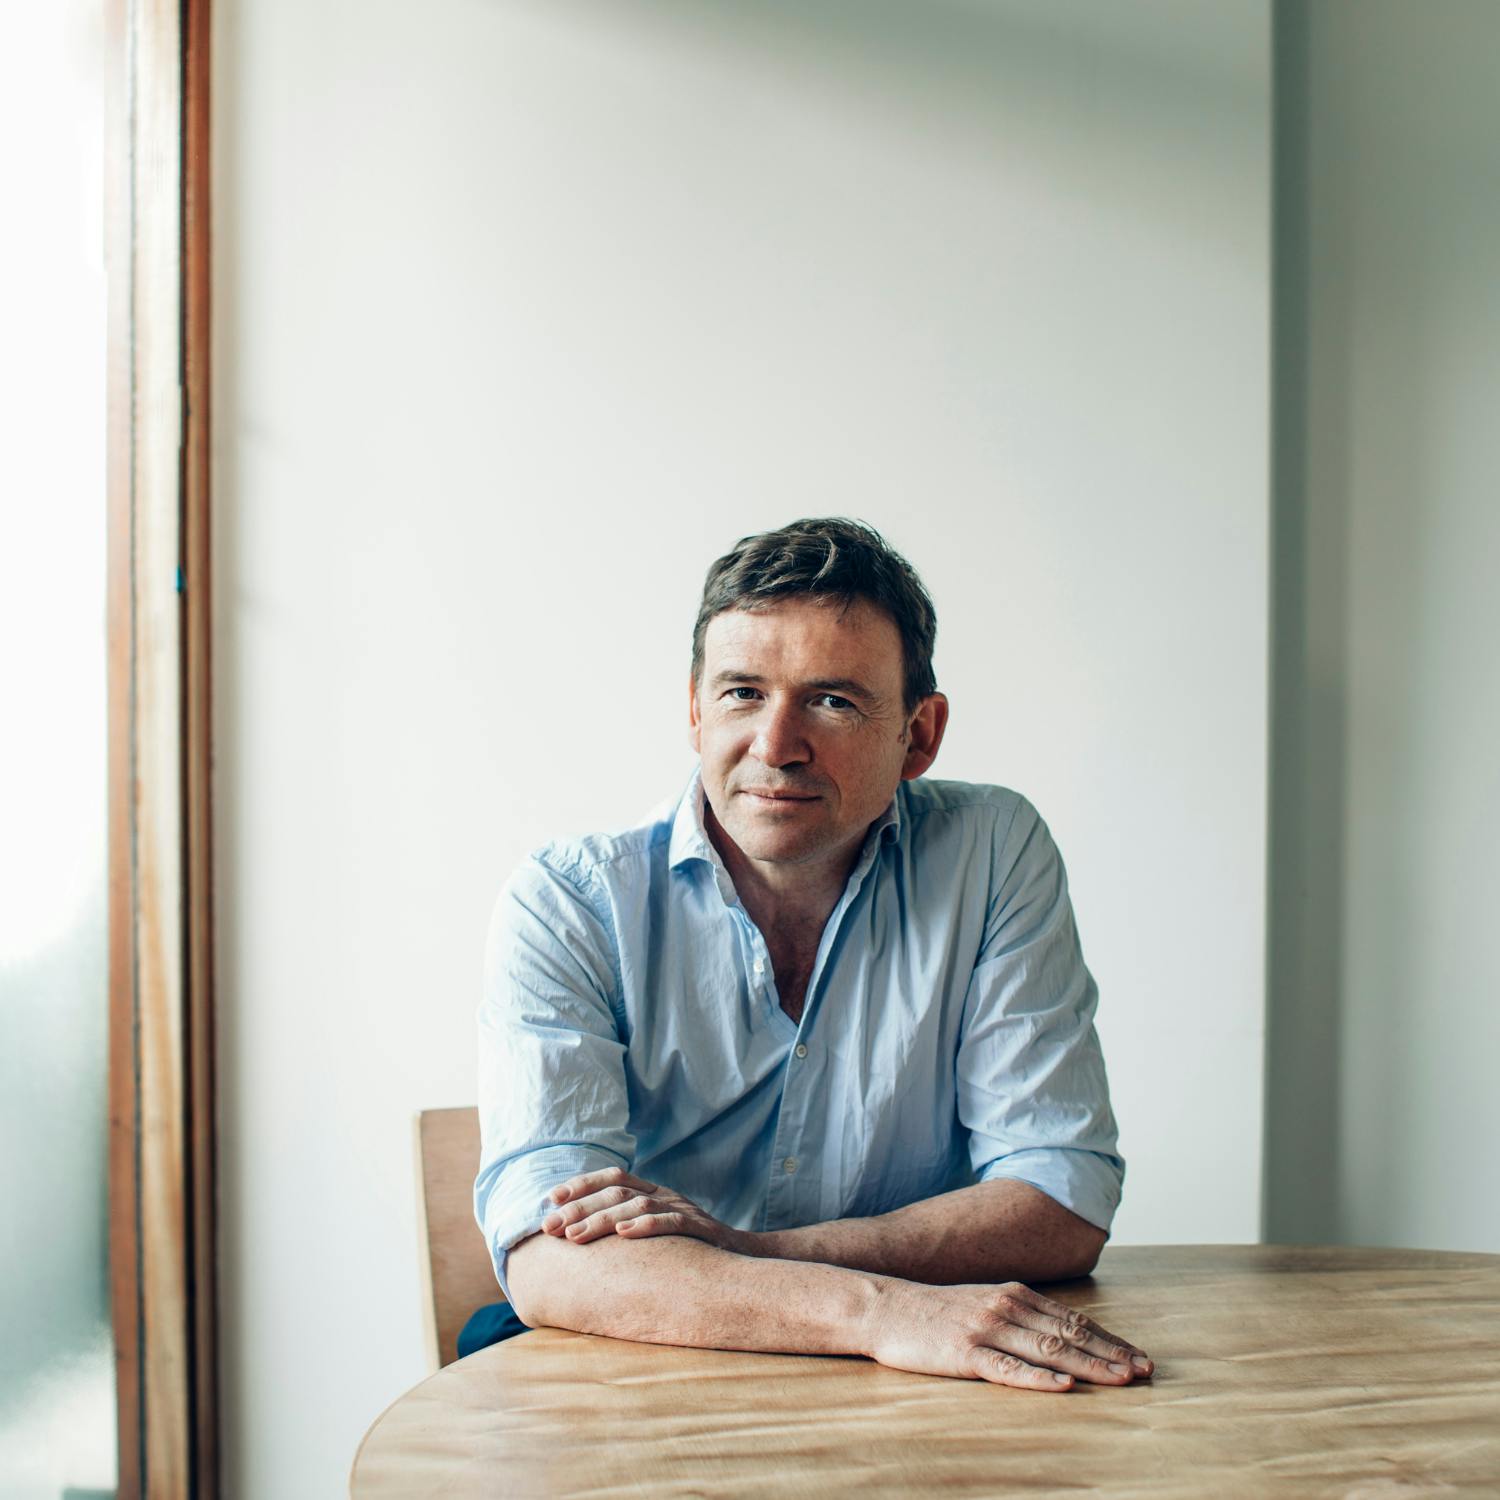 Best-selling author David Nicholls on his new book